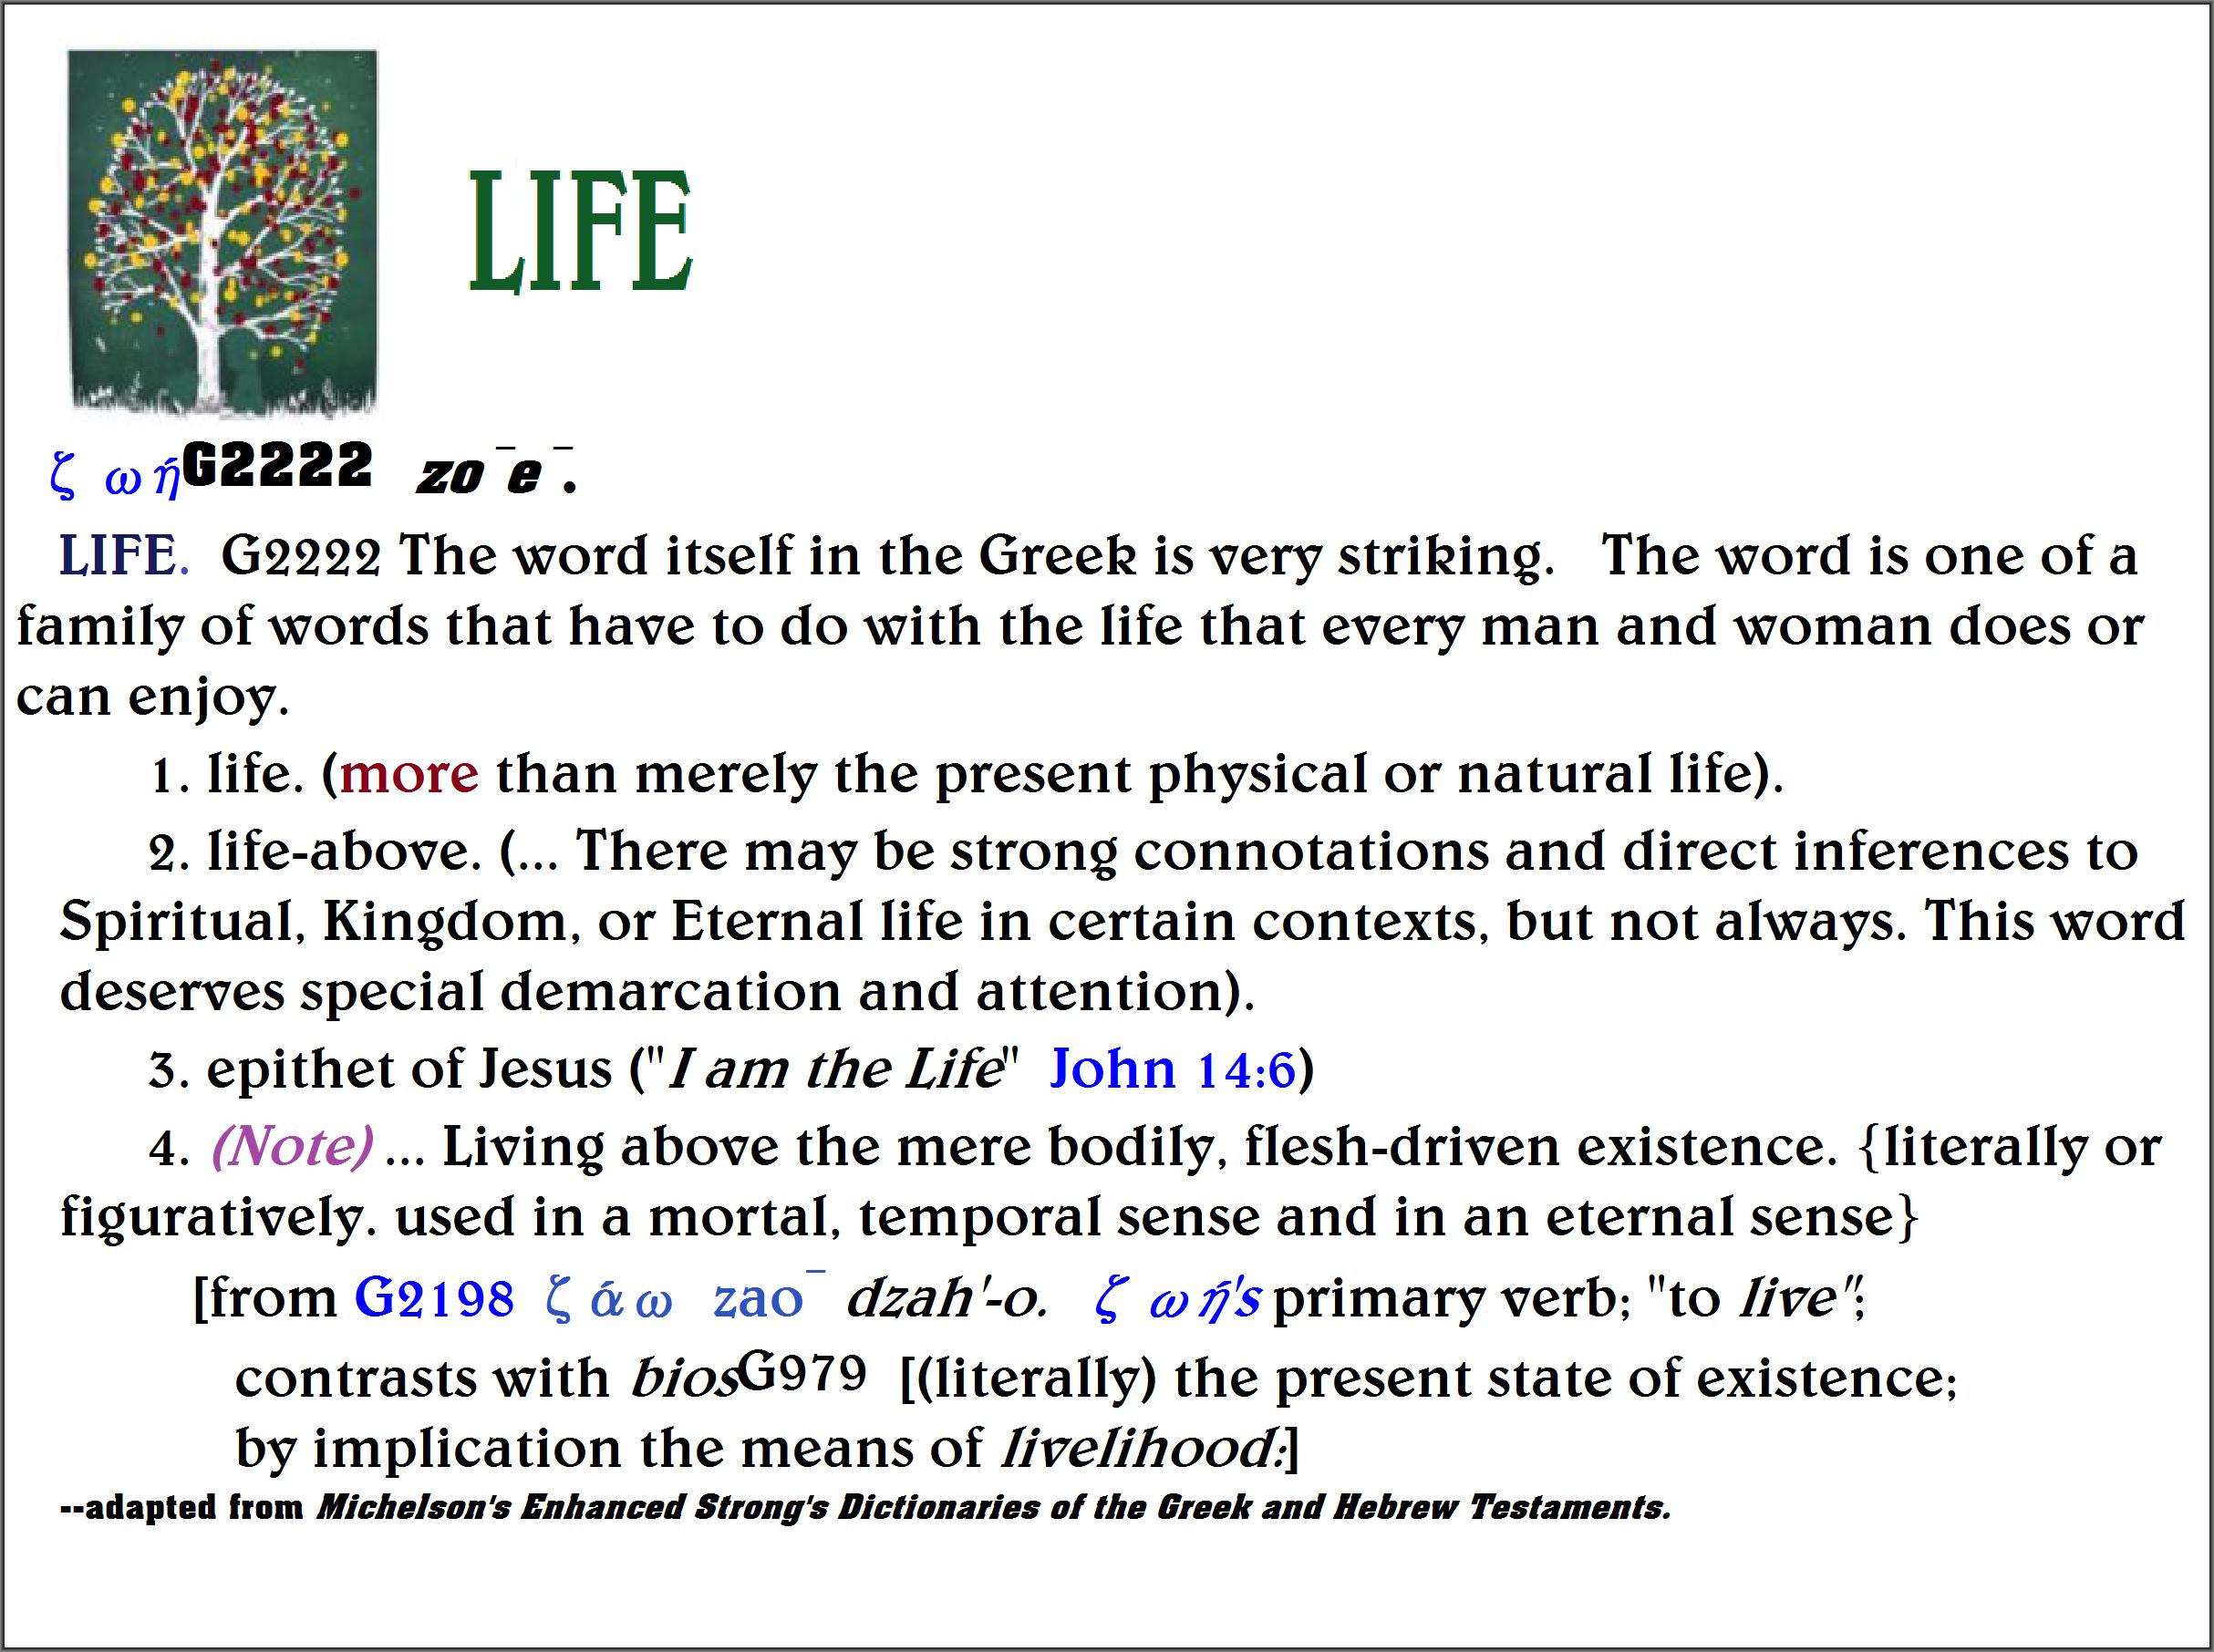 meaning of 'life' of the Tree of Life